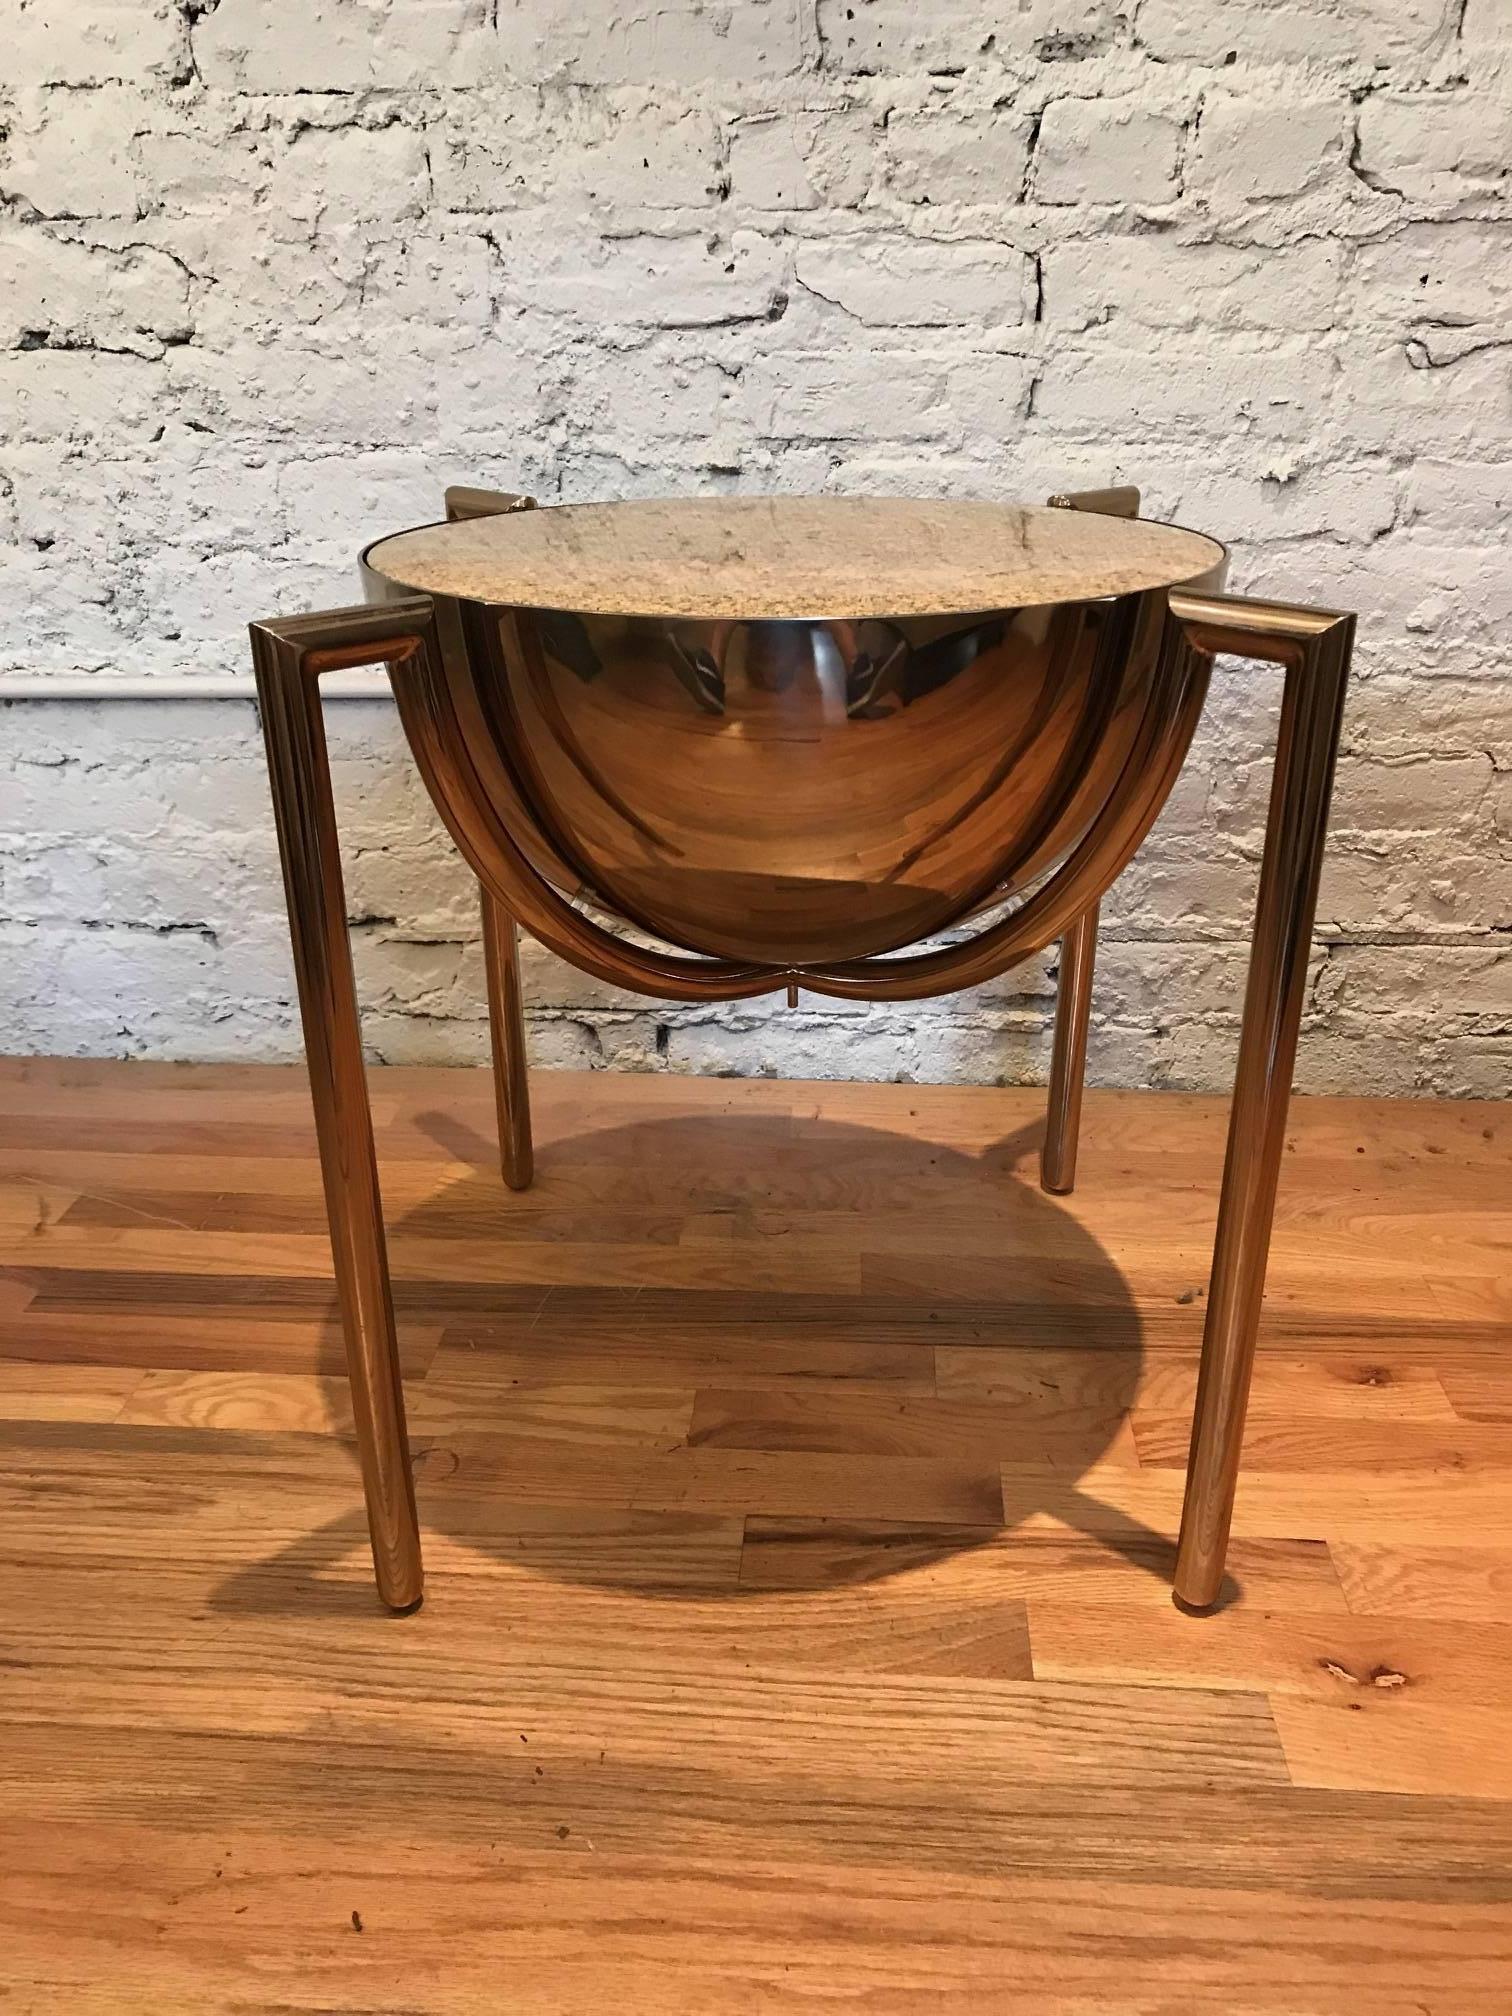 An occassional end or side table designed by J Wade Beam for Brueton. The table has a polished bronze finish over stainless steel. Its top is granite with a beveled edge. First rate quality and seamless construction.